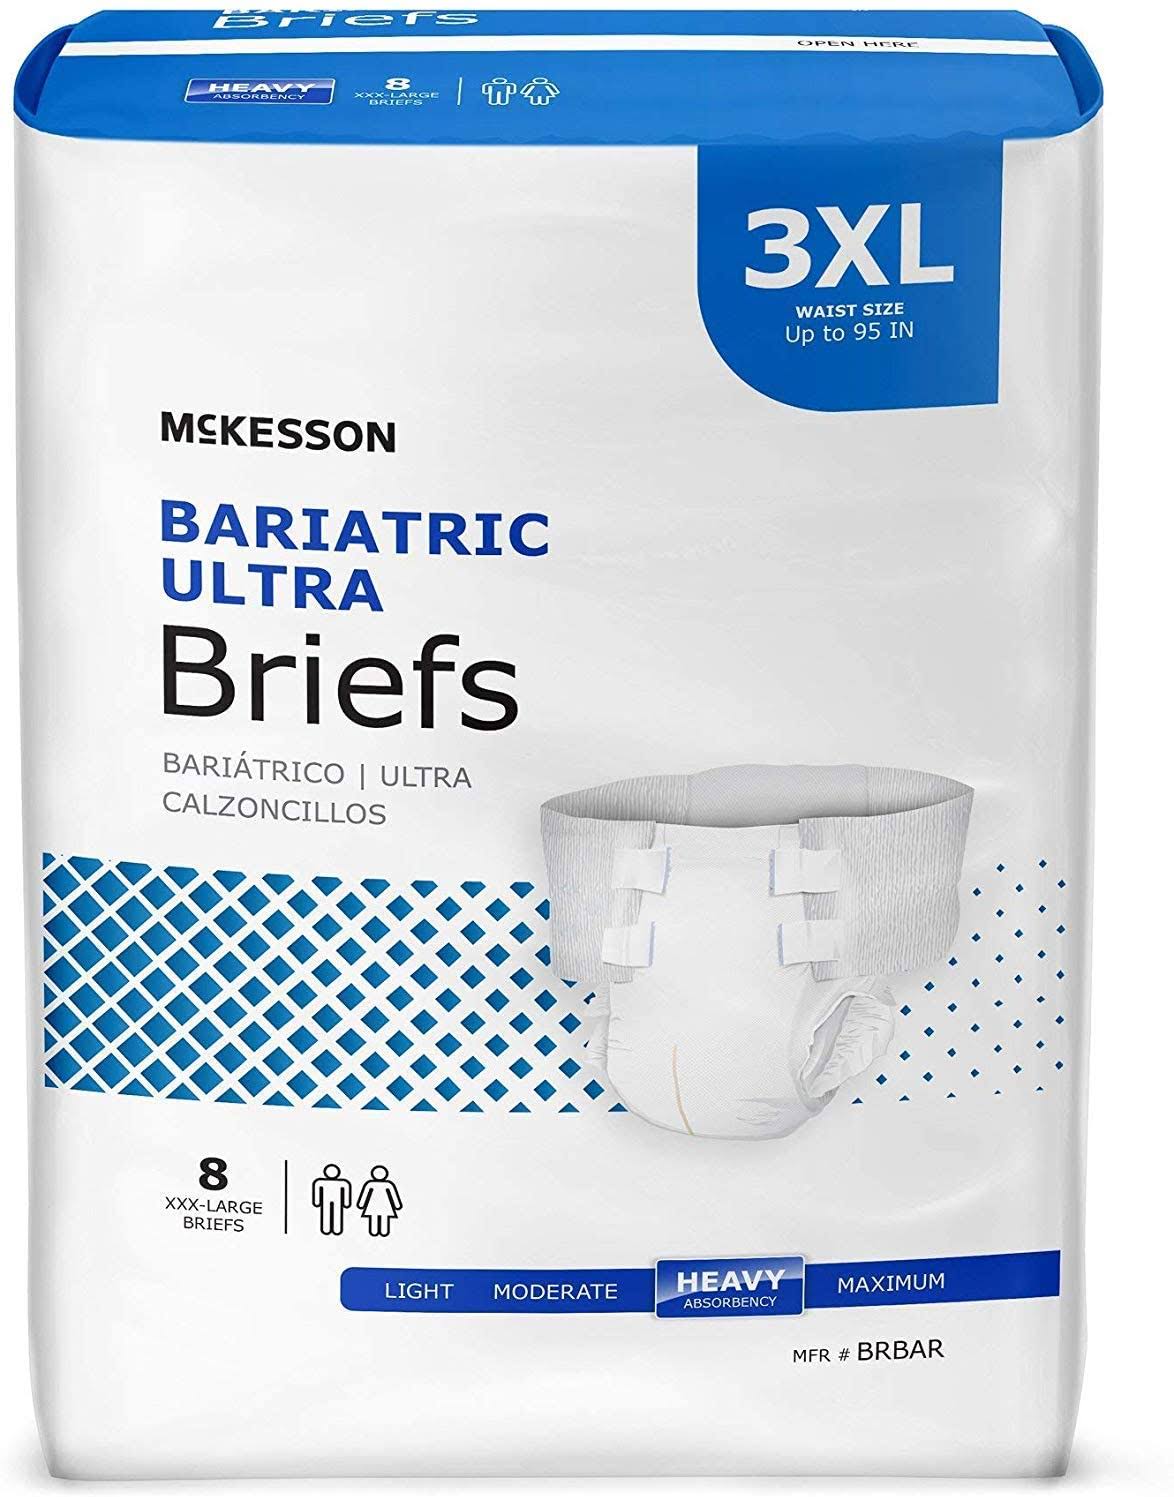 McKesson Haba Personal Care Adult Diapers New